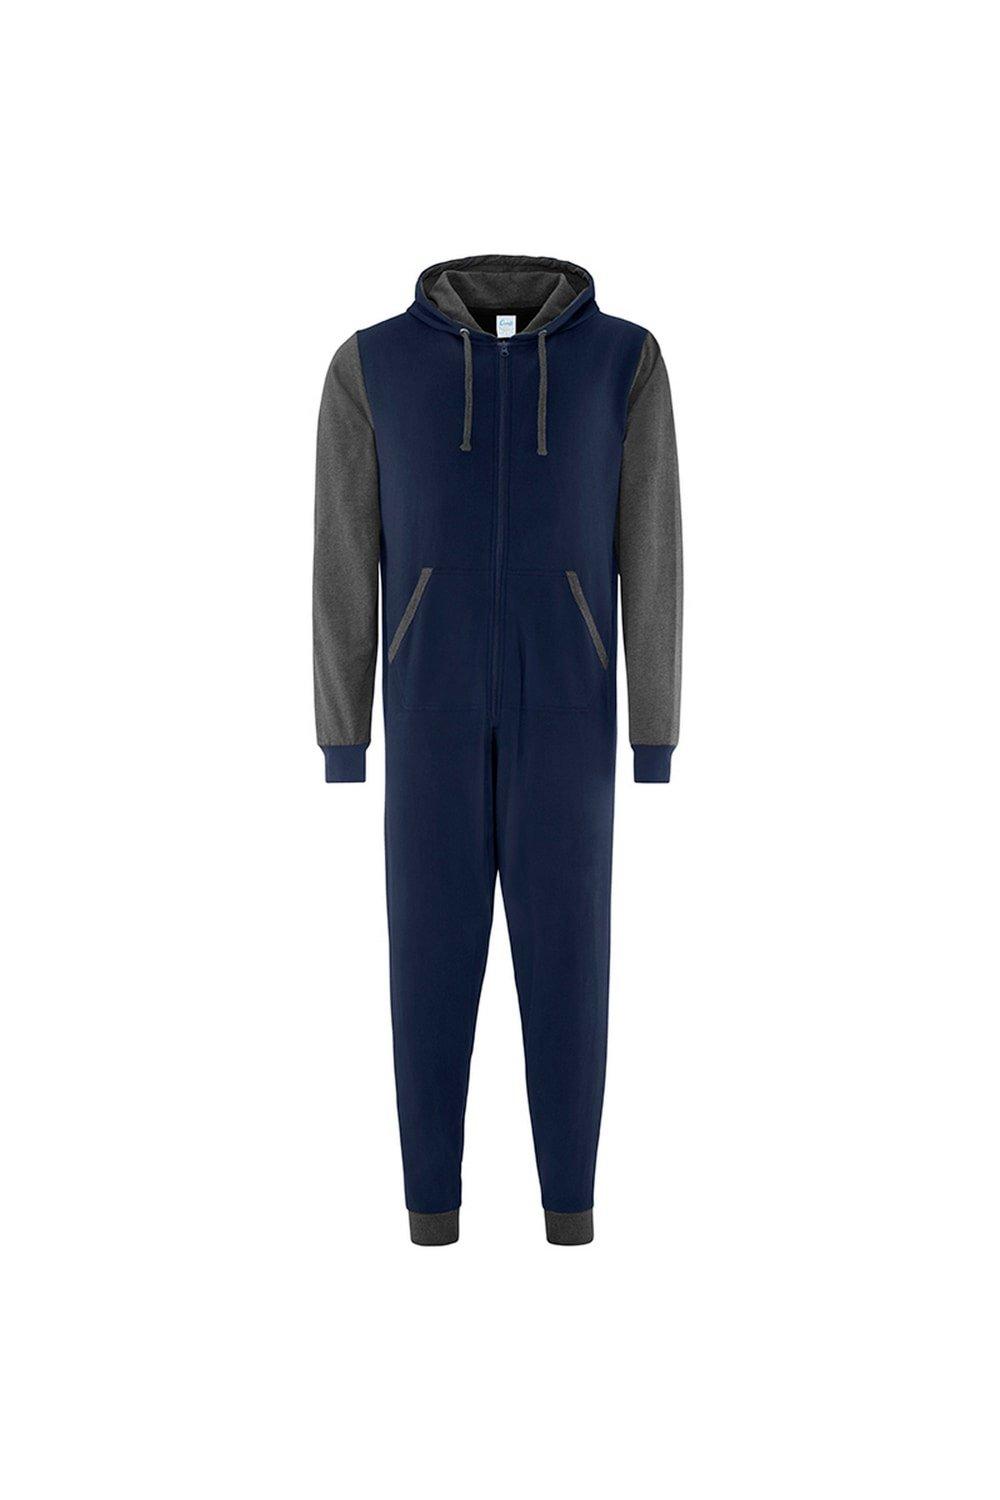 Two Tone Contrast All-In-One Onesie